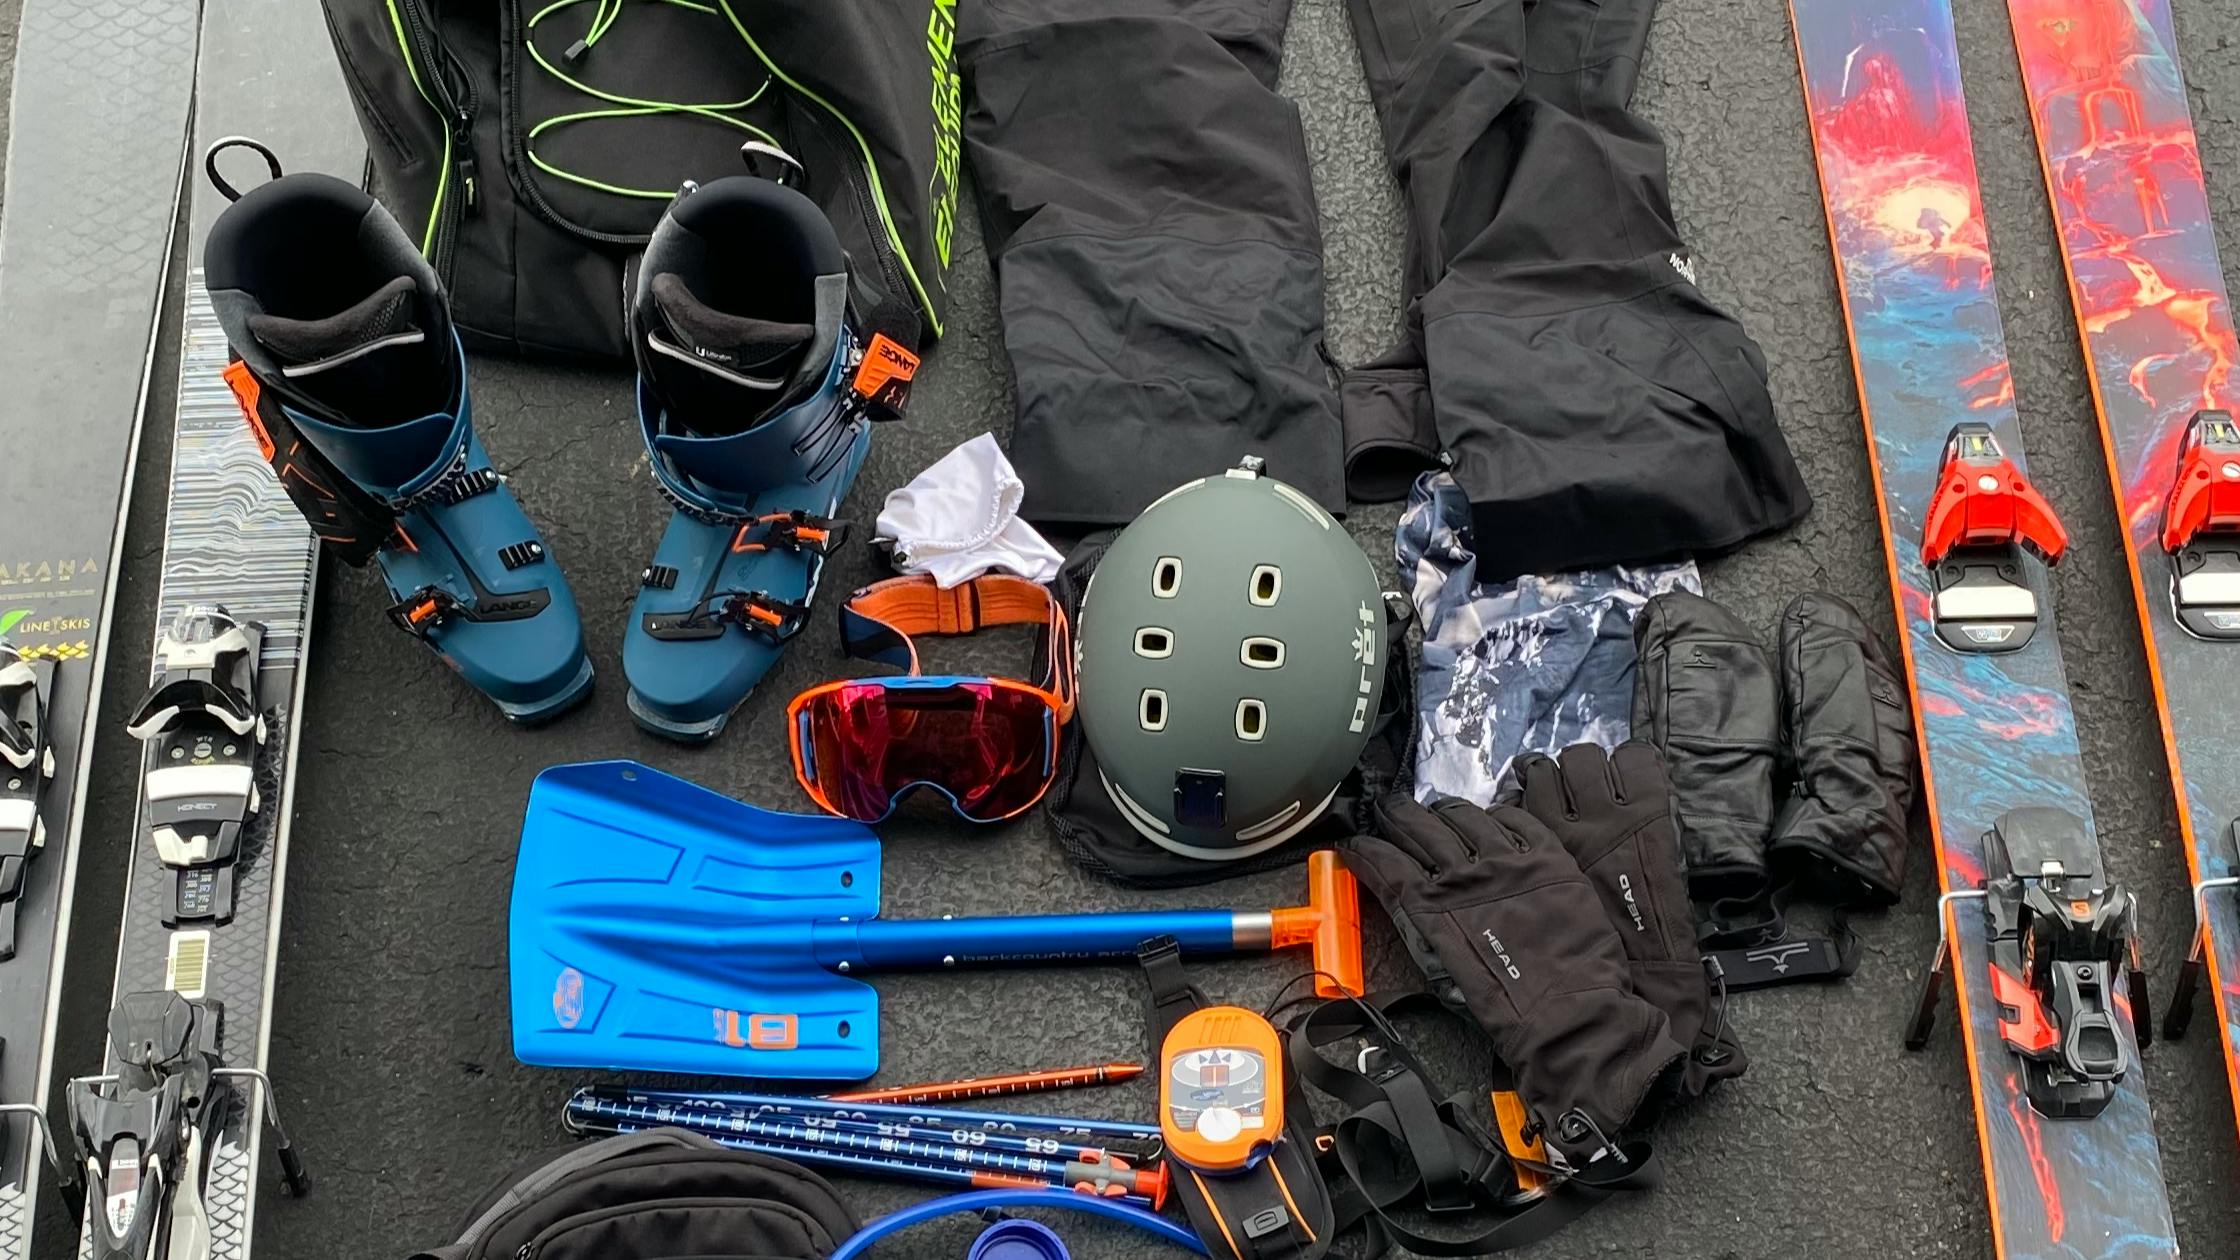 An image of the author's snow pants, helmet, shovel, goggles, gloves, buff, boot bag, 2 pairs of skis, and ski bag laying on asphalt. 